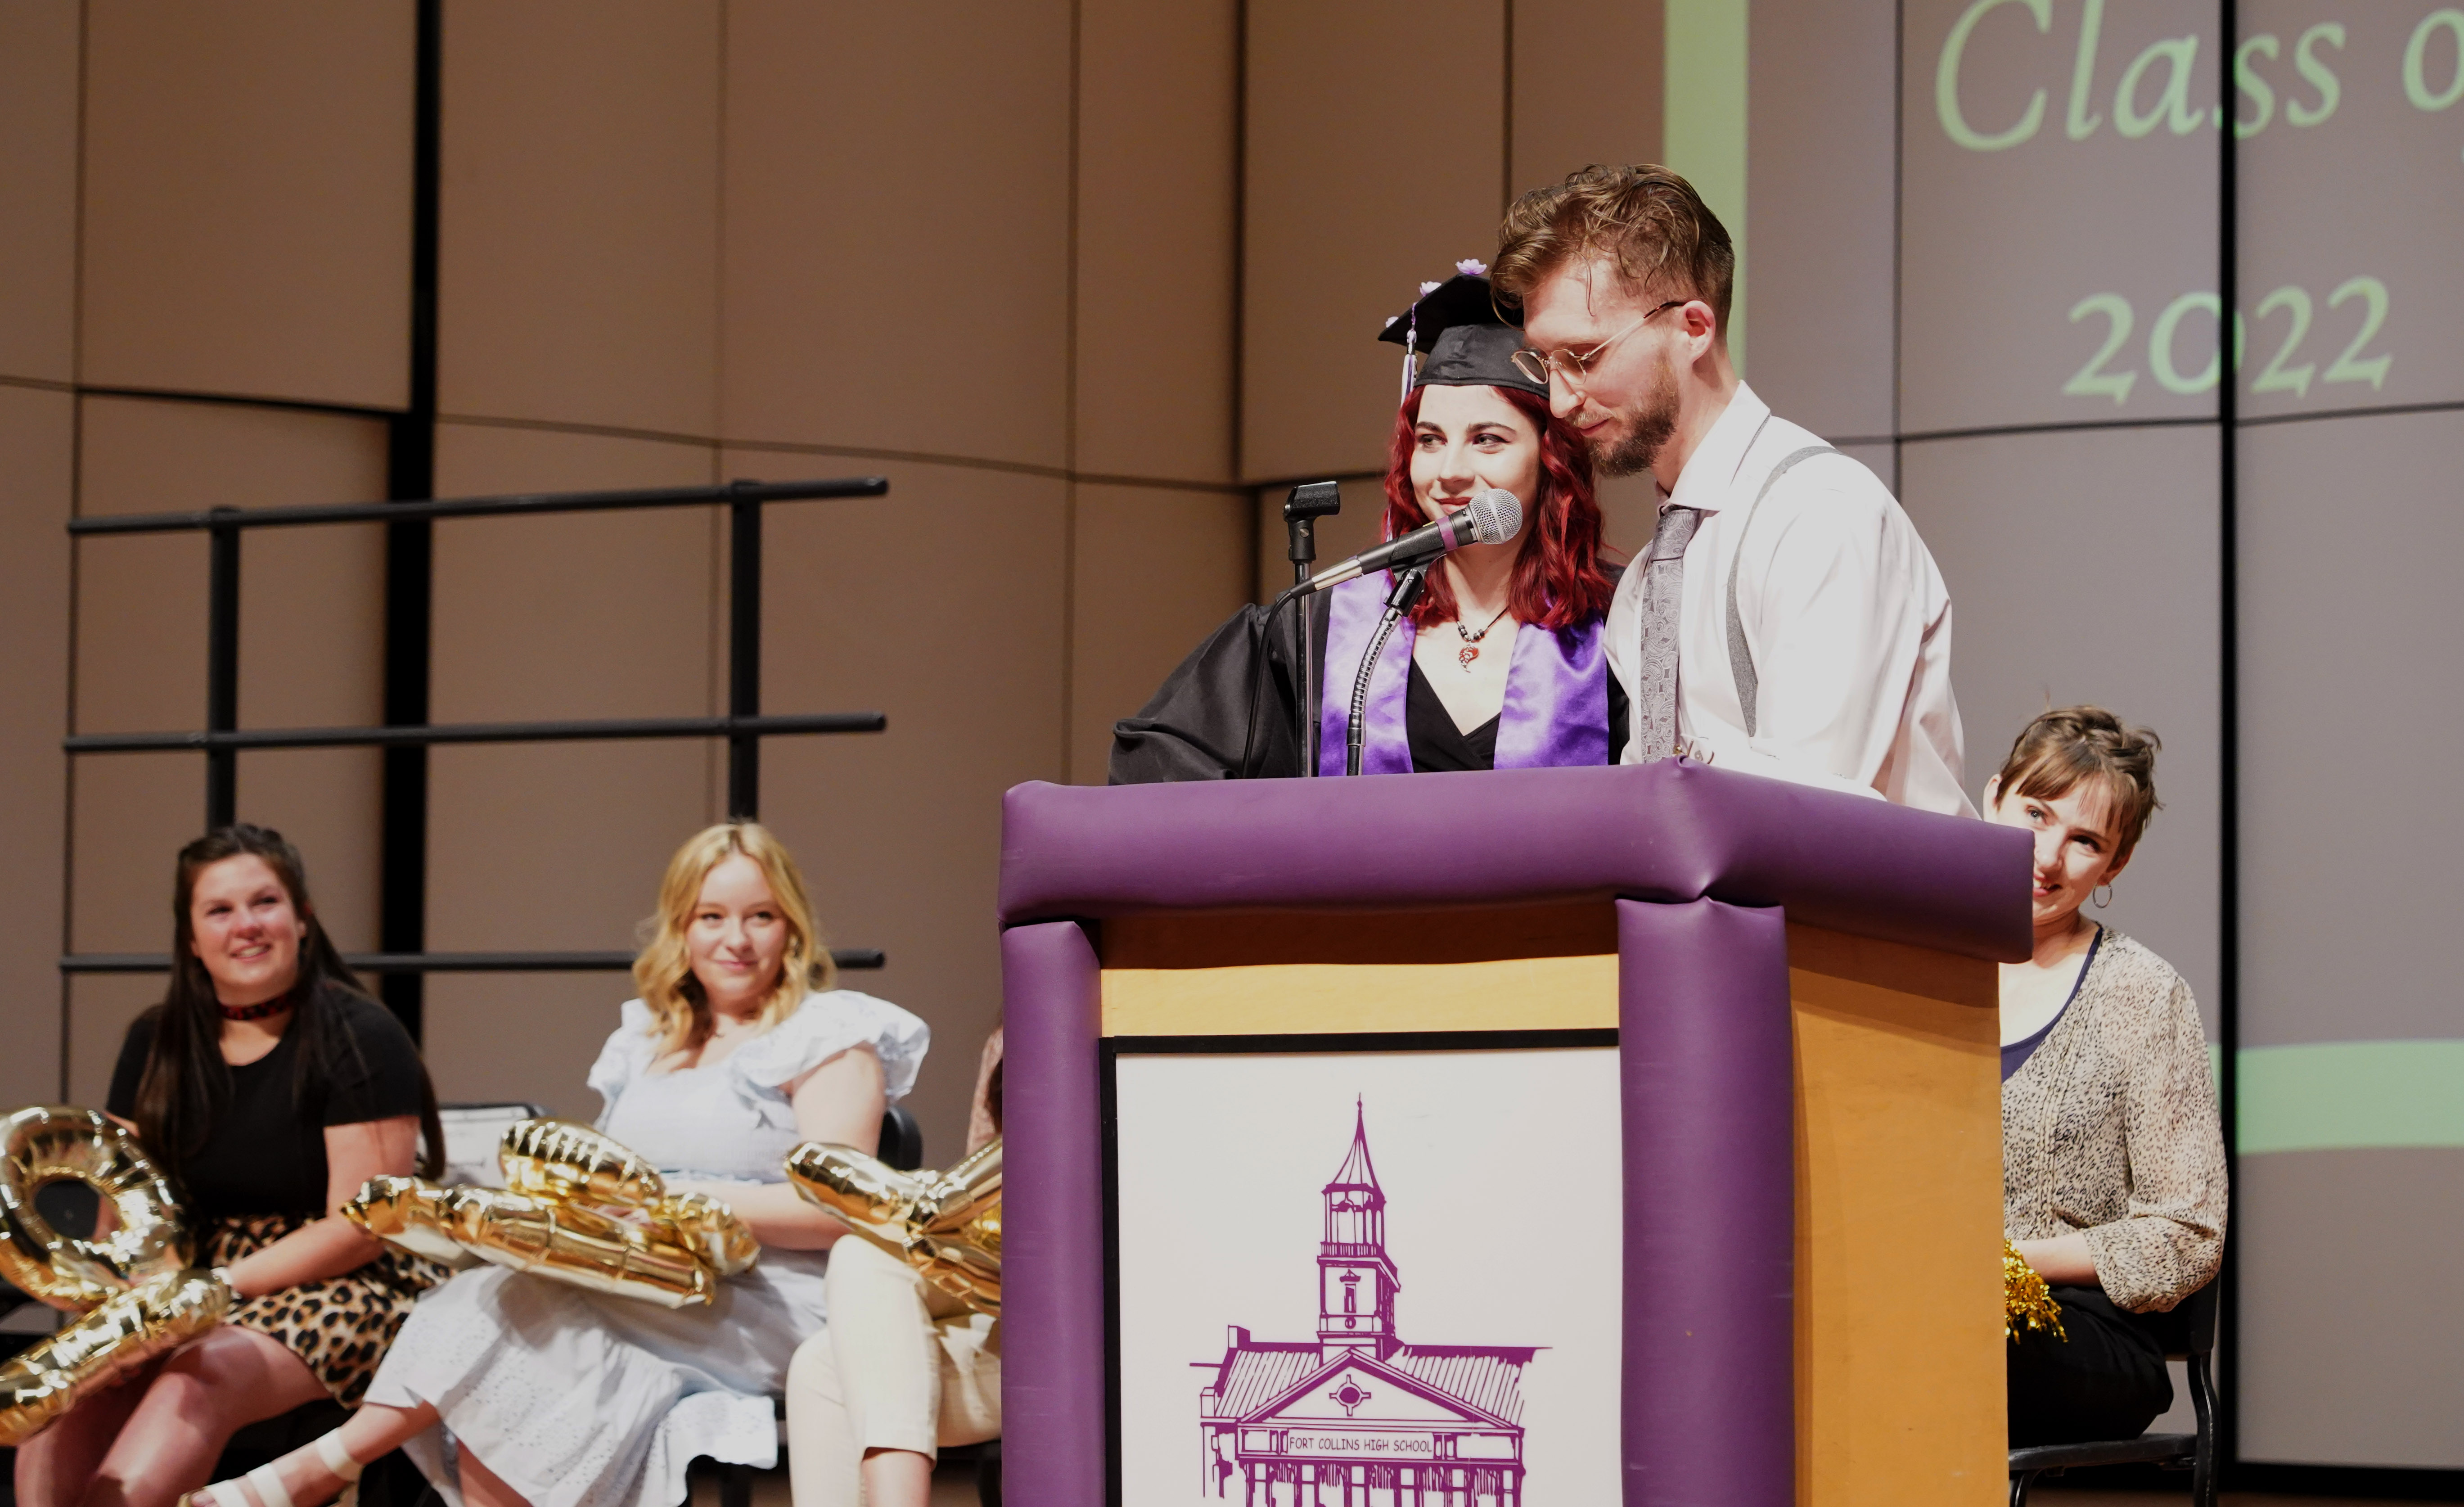 Two people at the podium with graduates in the background.